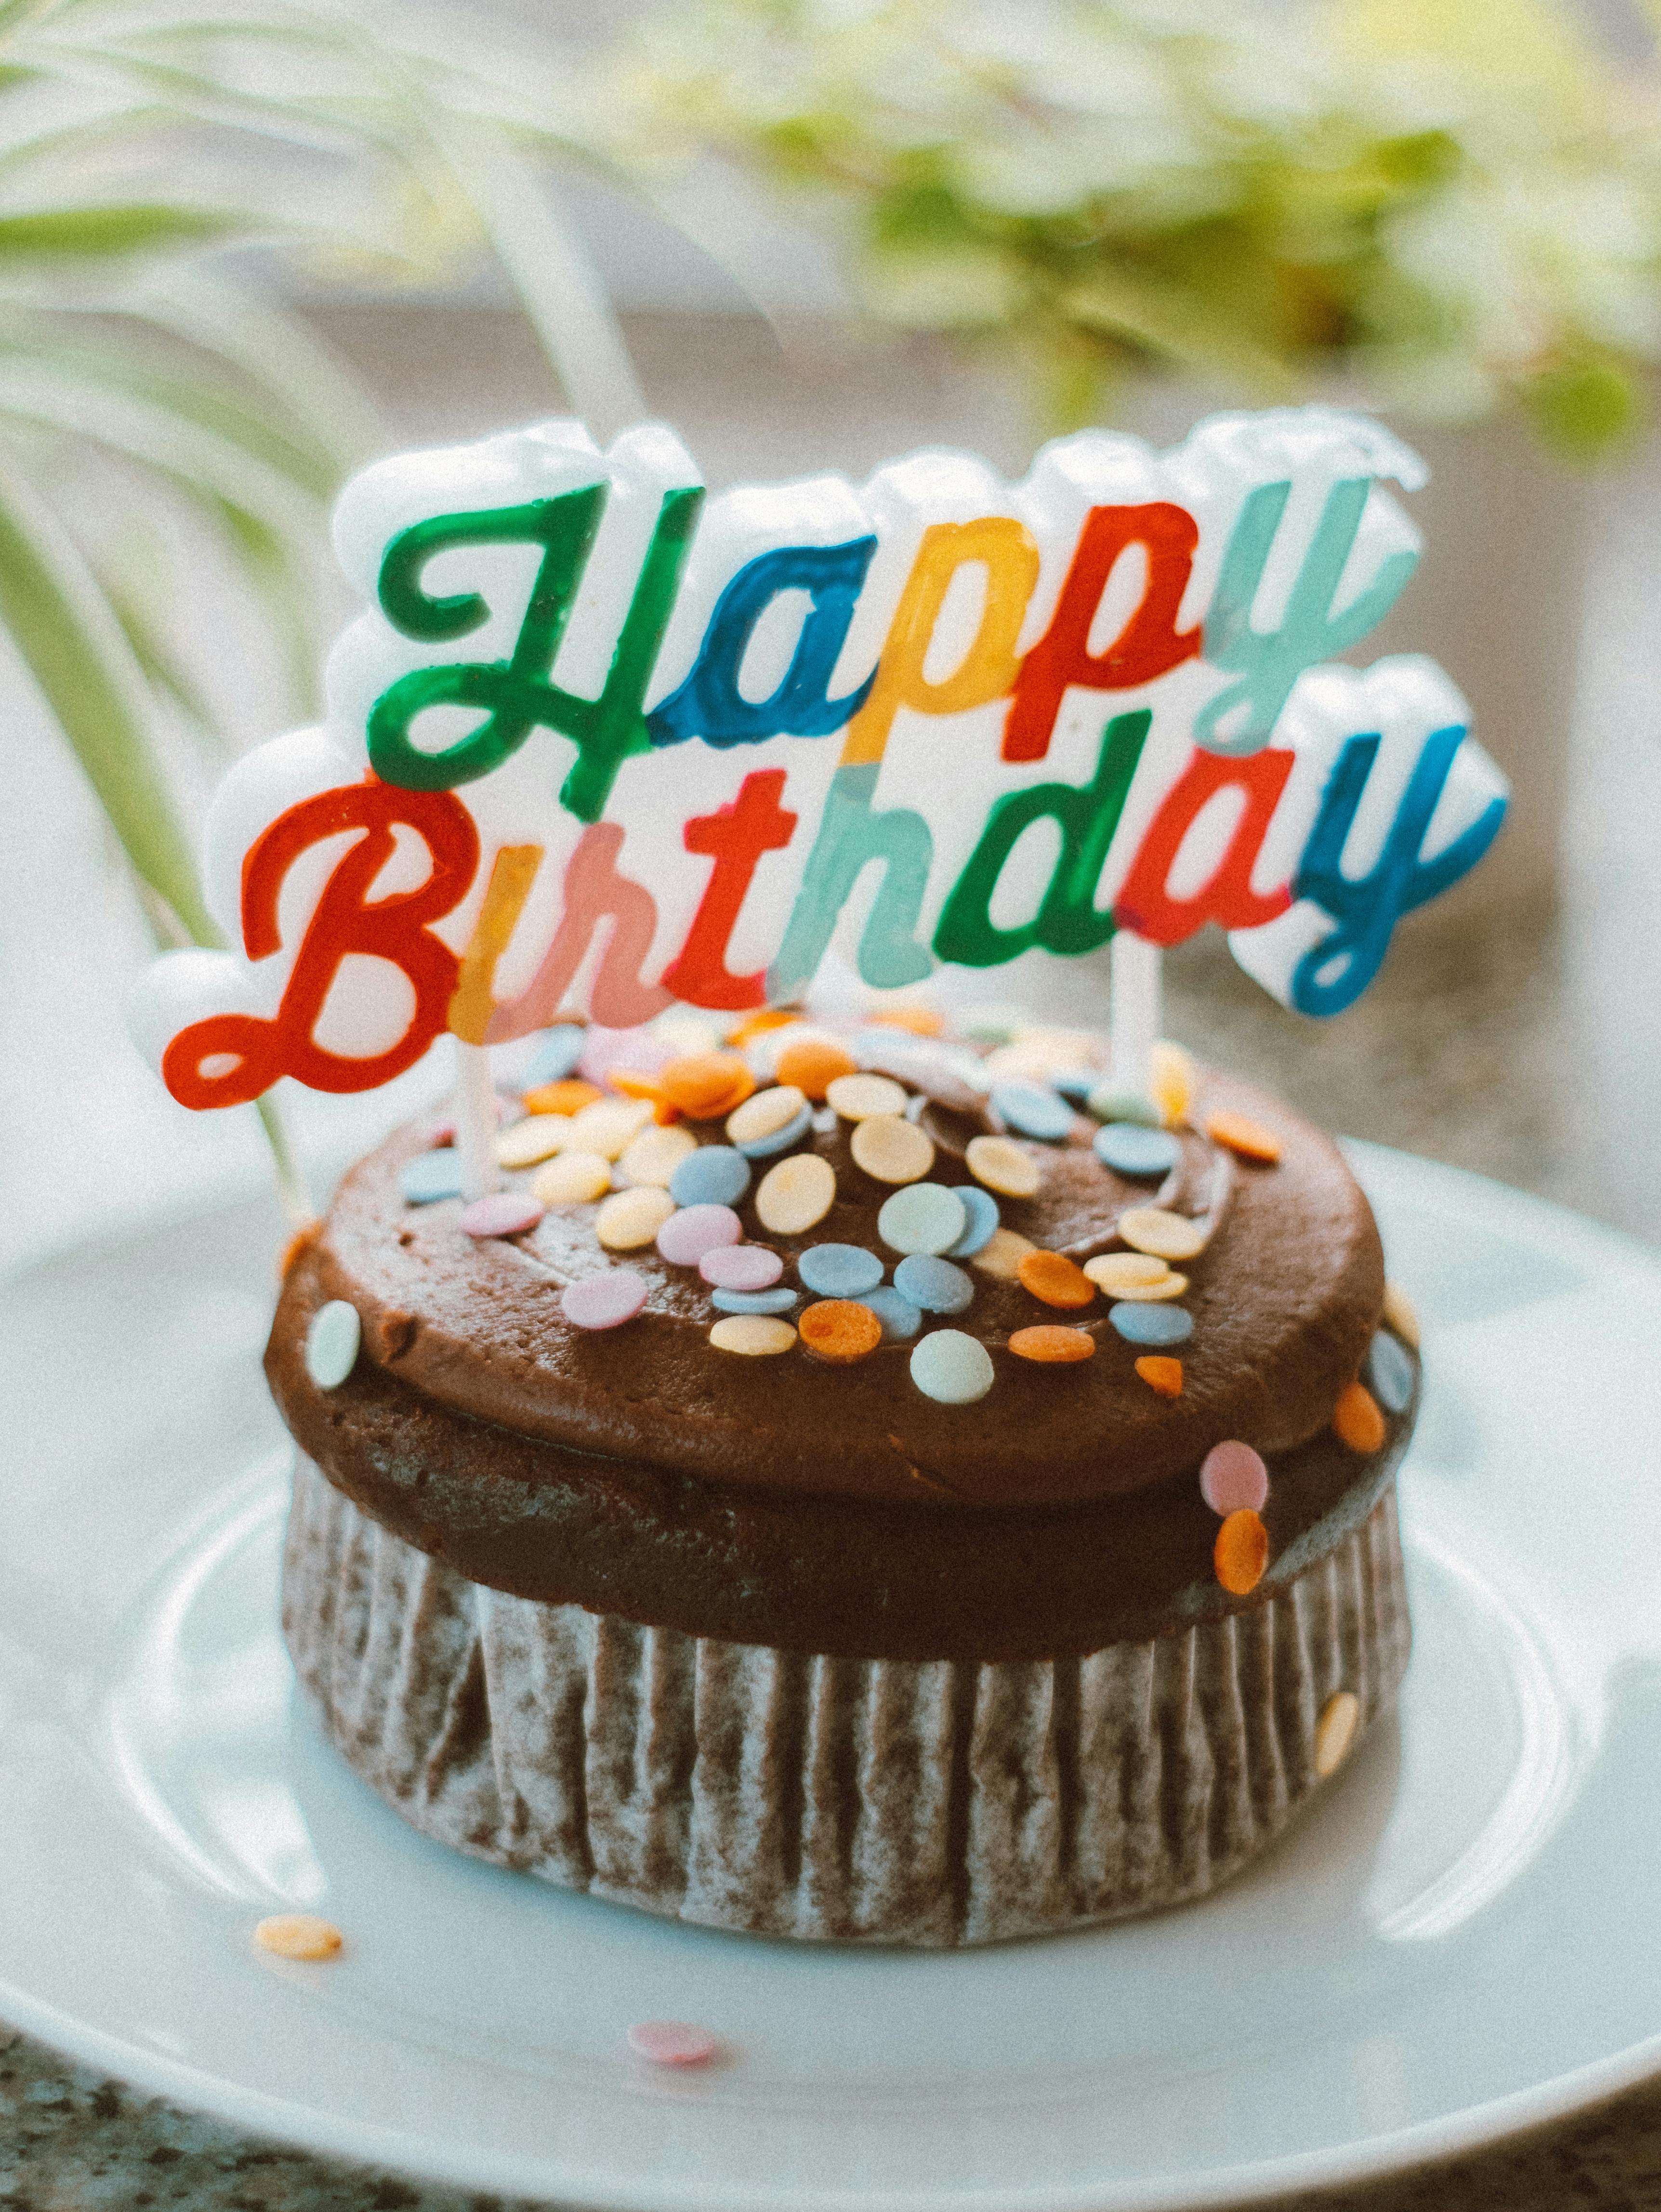 most beautiful birthday cakes pictures